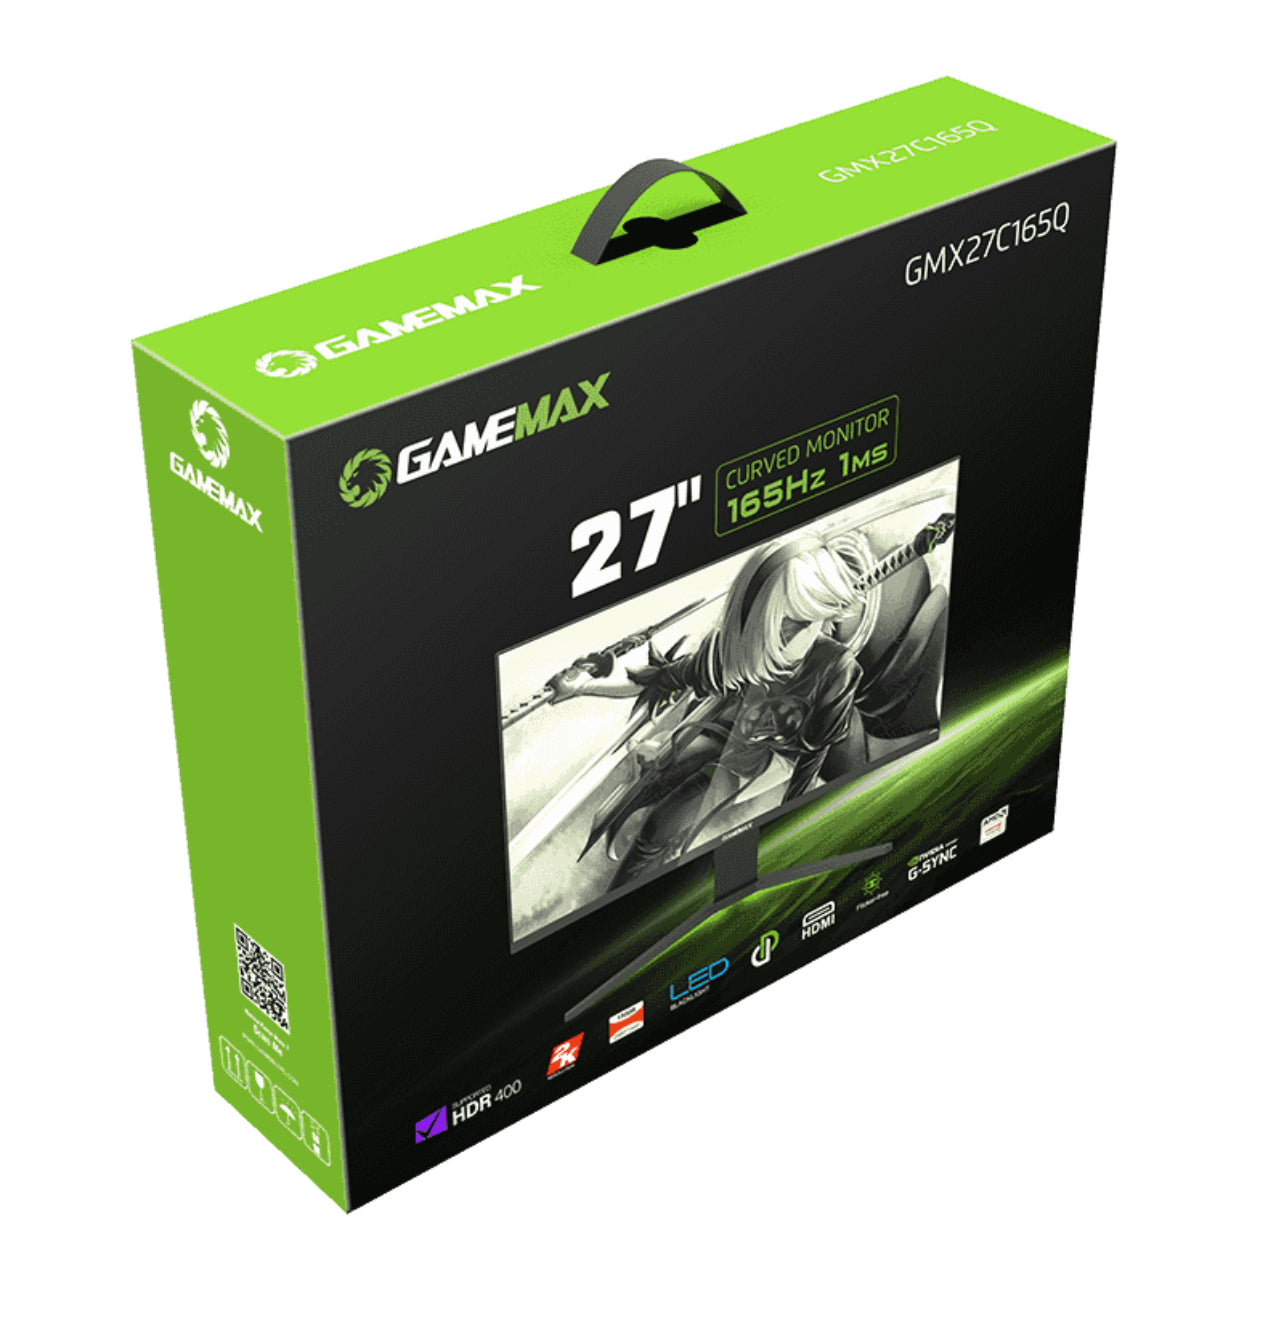 165hz Curved Monitor gamemax